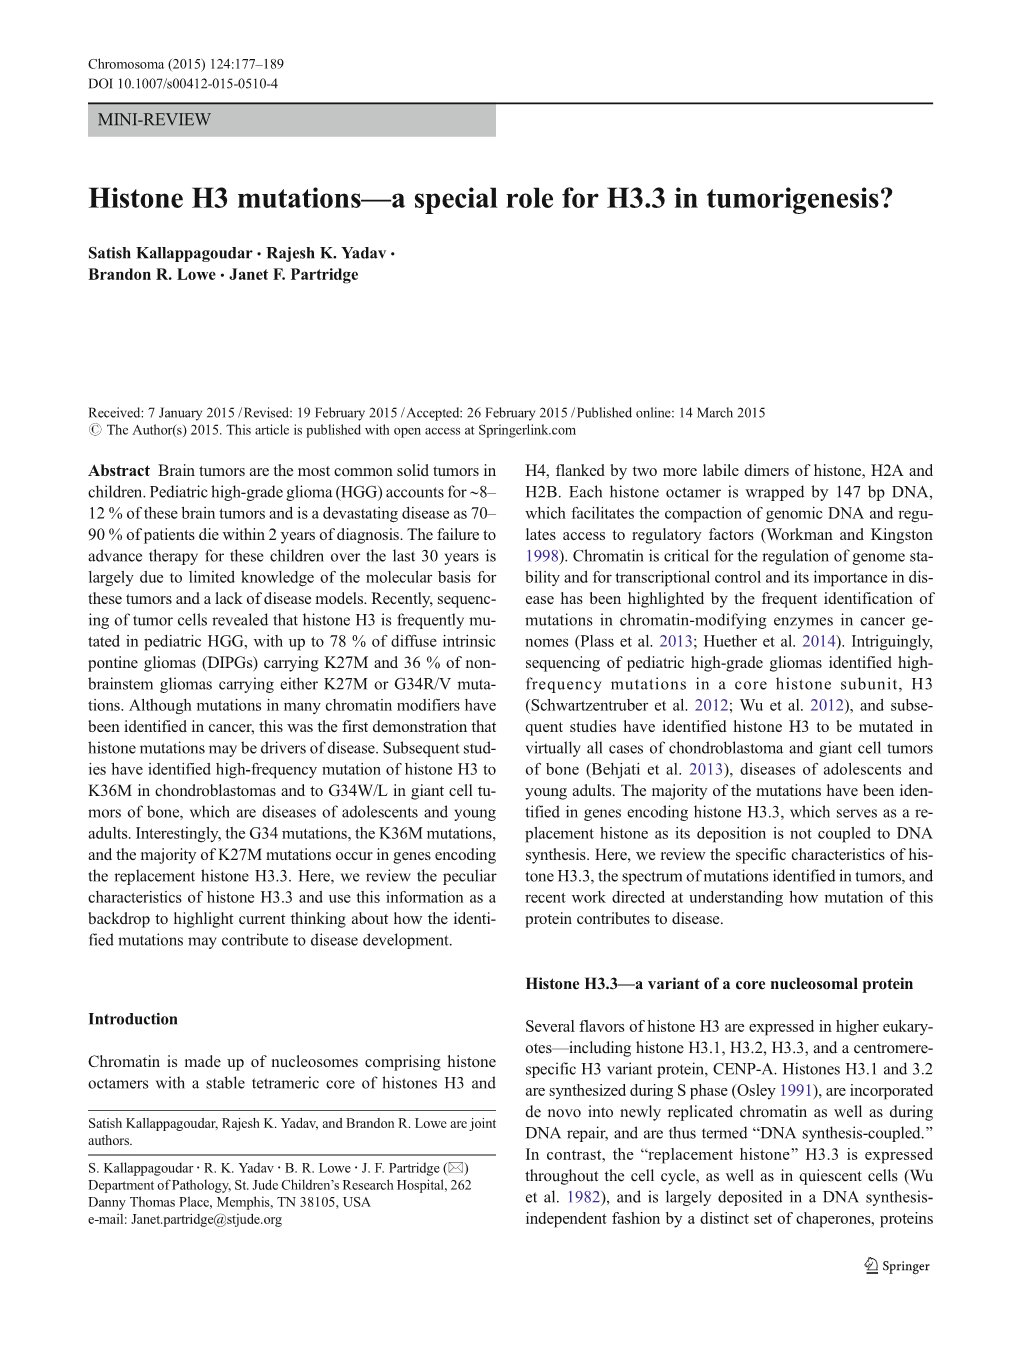 Histone H3 Mutations—A Special Role for H3.3 in Tumorigenesis?